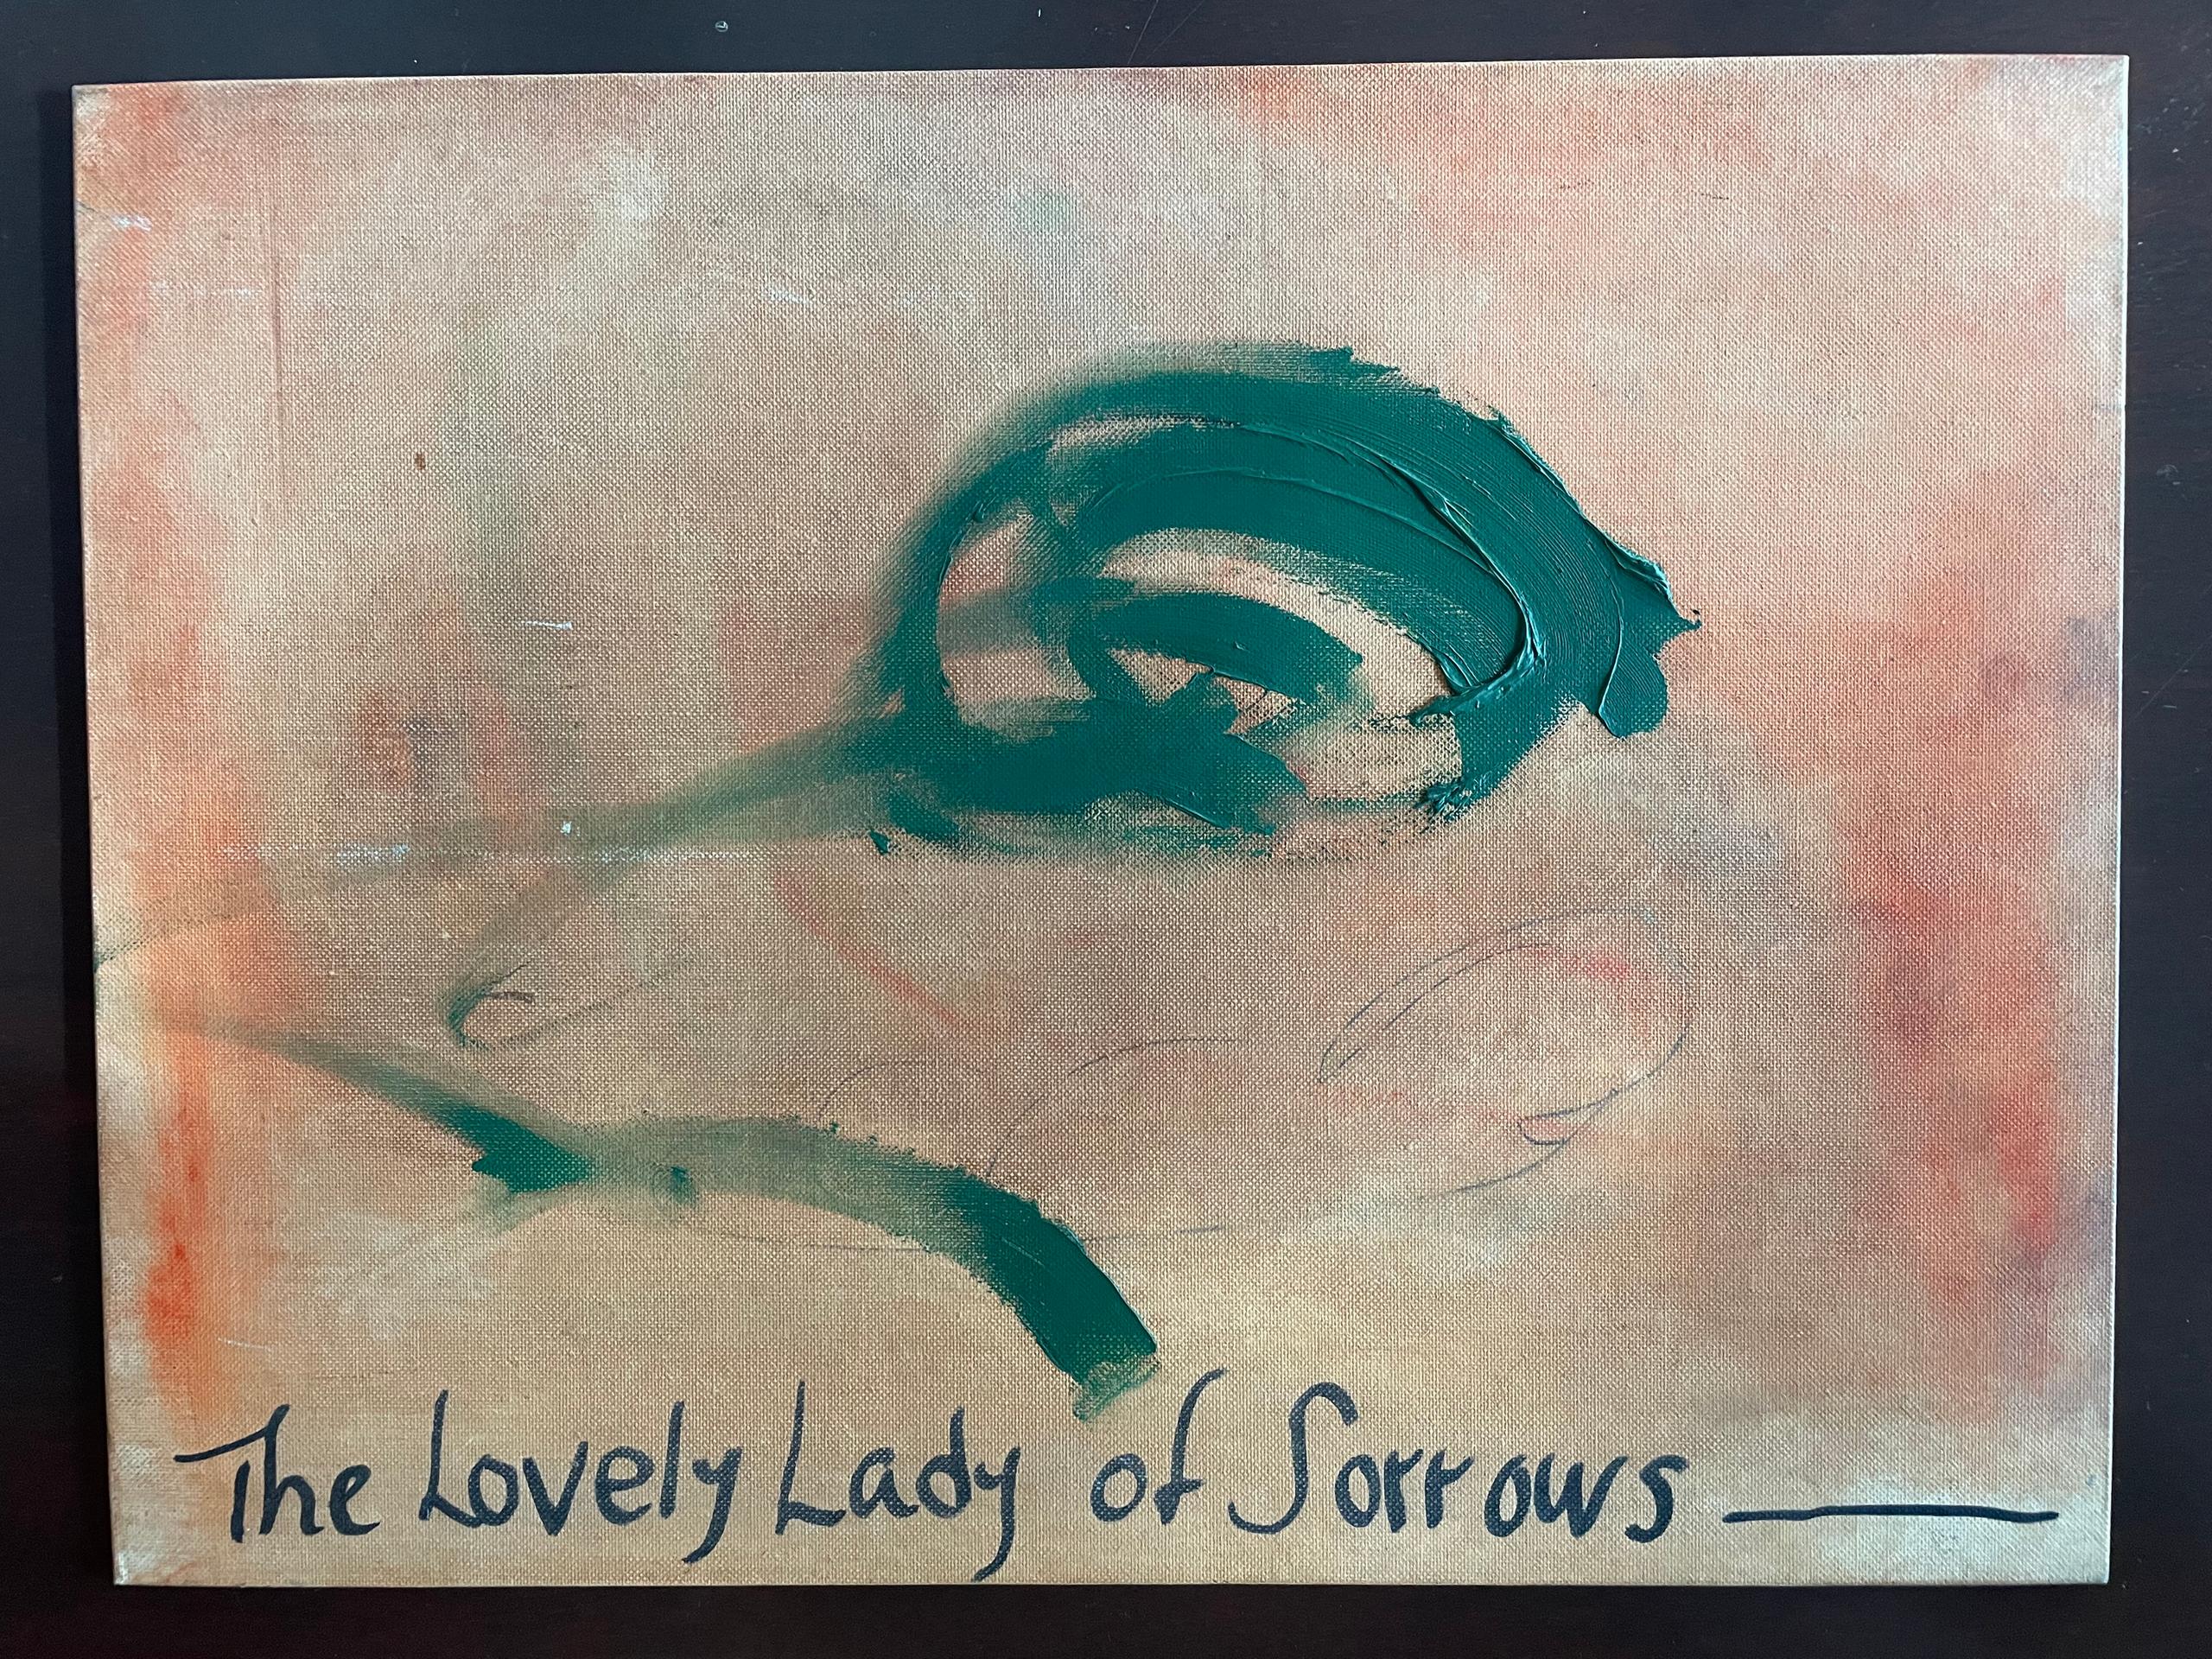 The lovely lady of sorrows